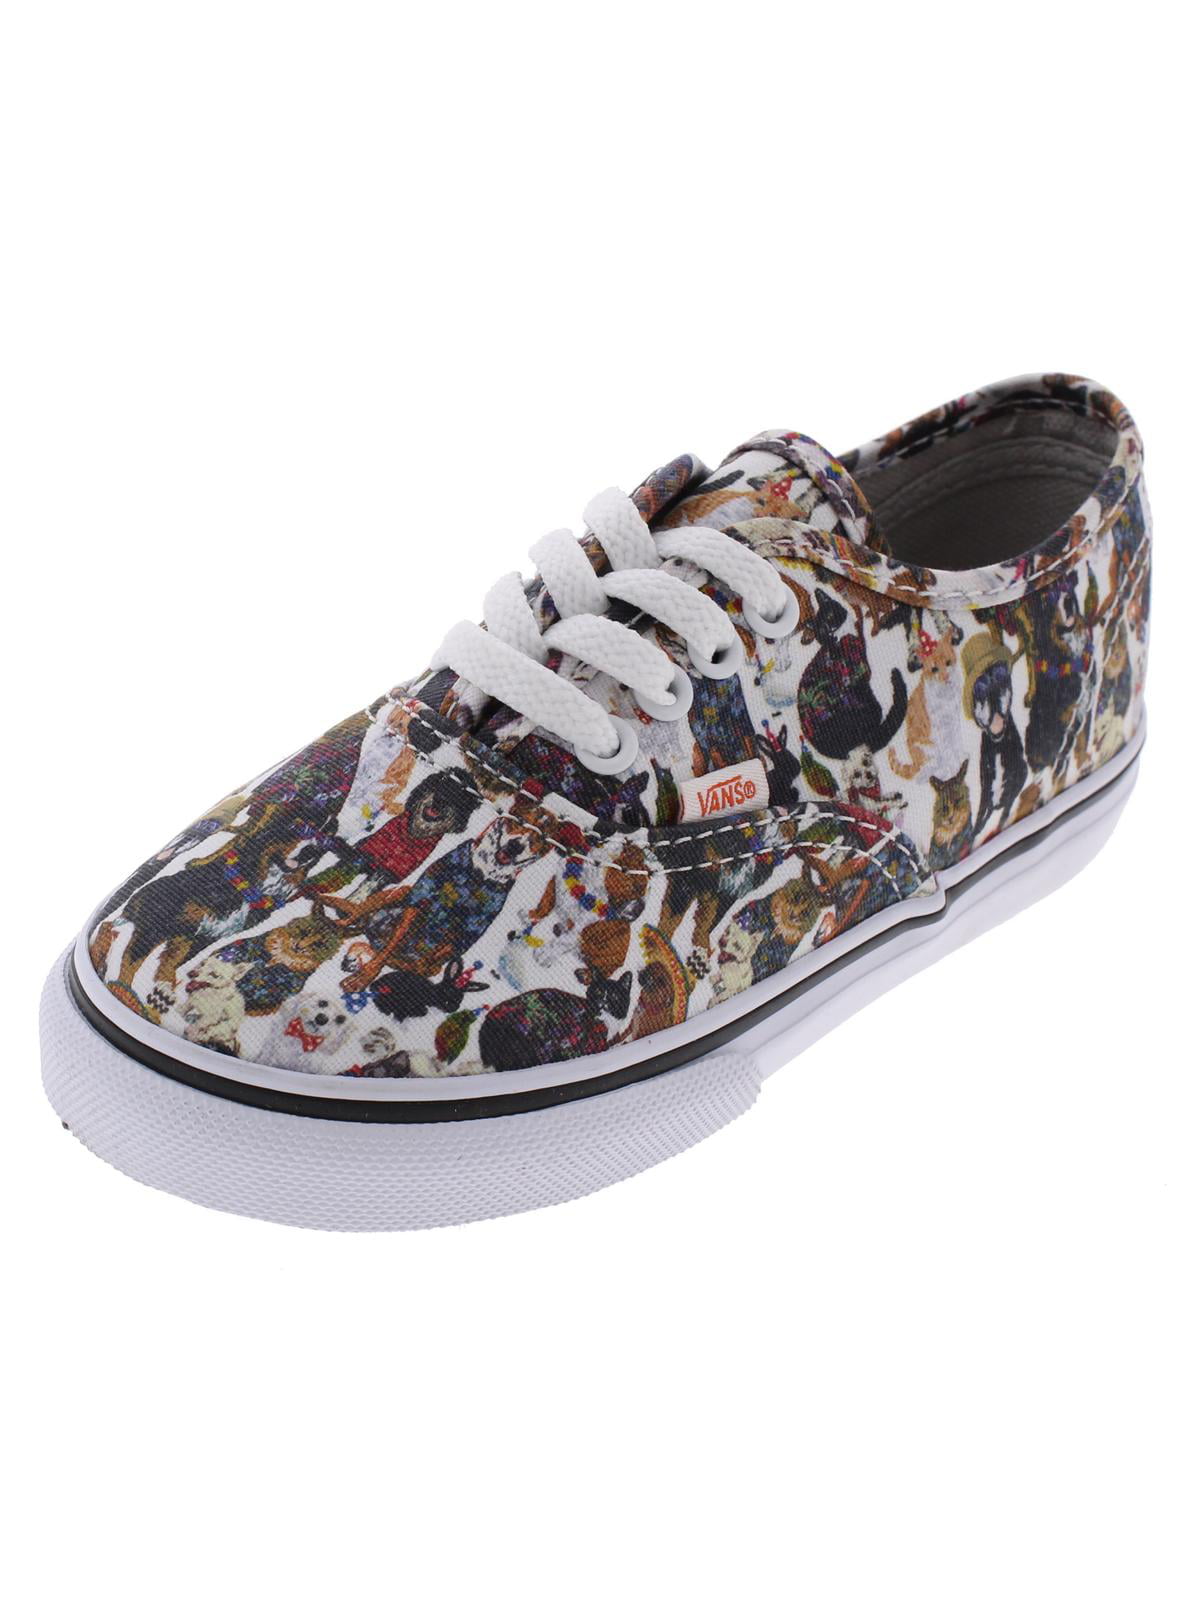 vans for dogs shoes